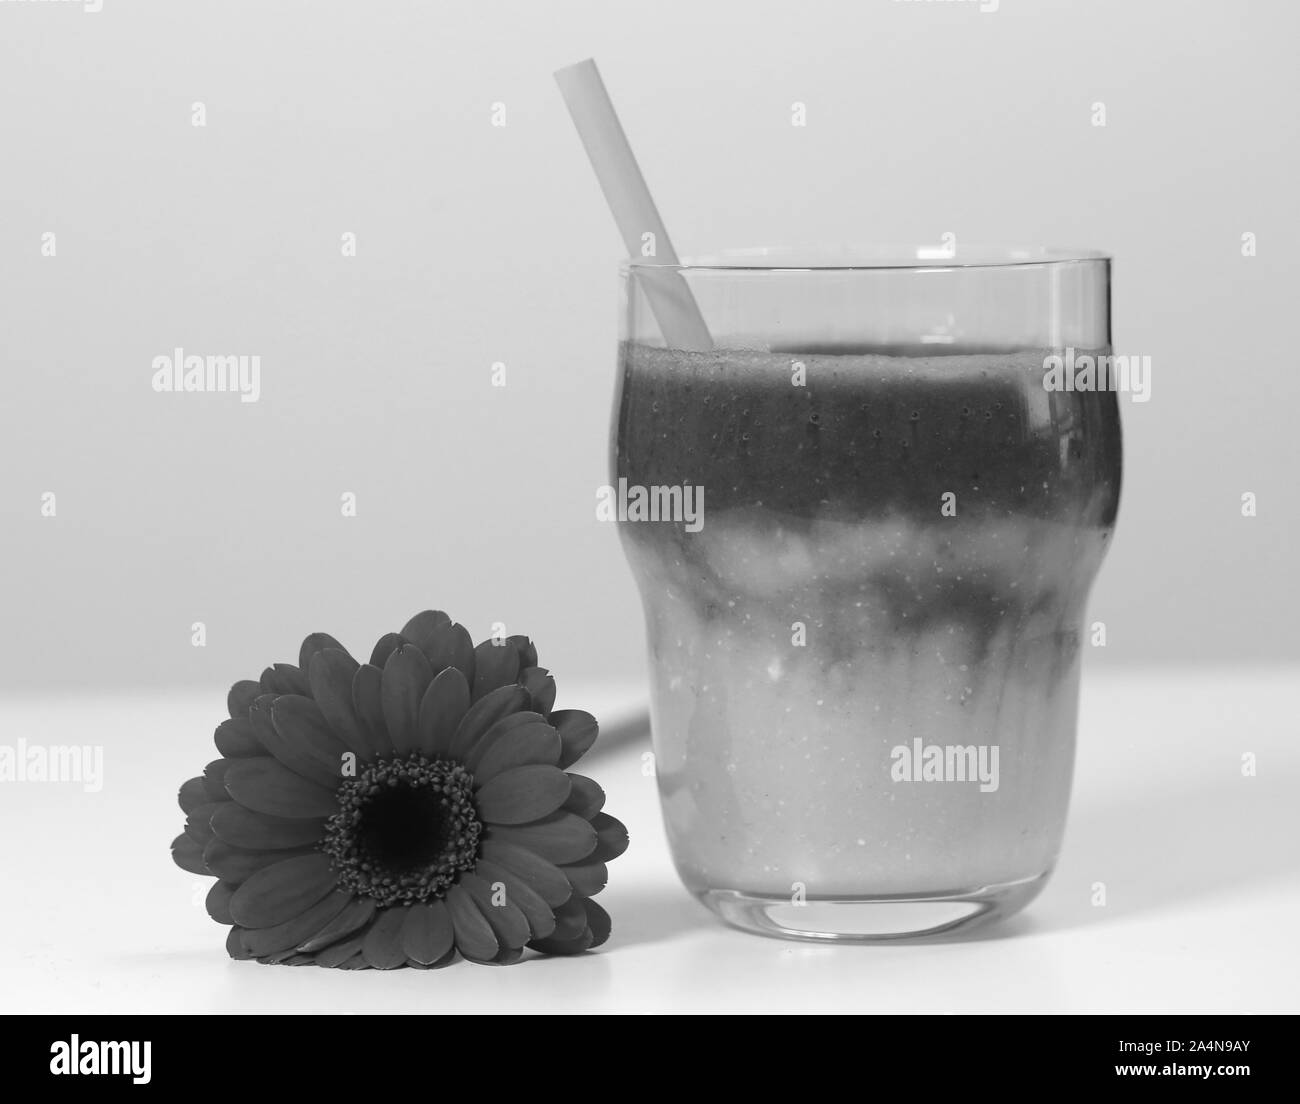 Healthy and delicious homemade smoothie(s) with a flower on a table. Closeup still life image. Healthy, delicious and nutritious snack, yummy! Stock Photo